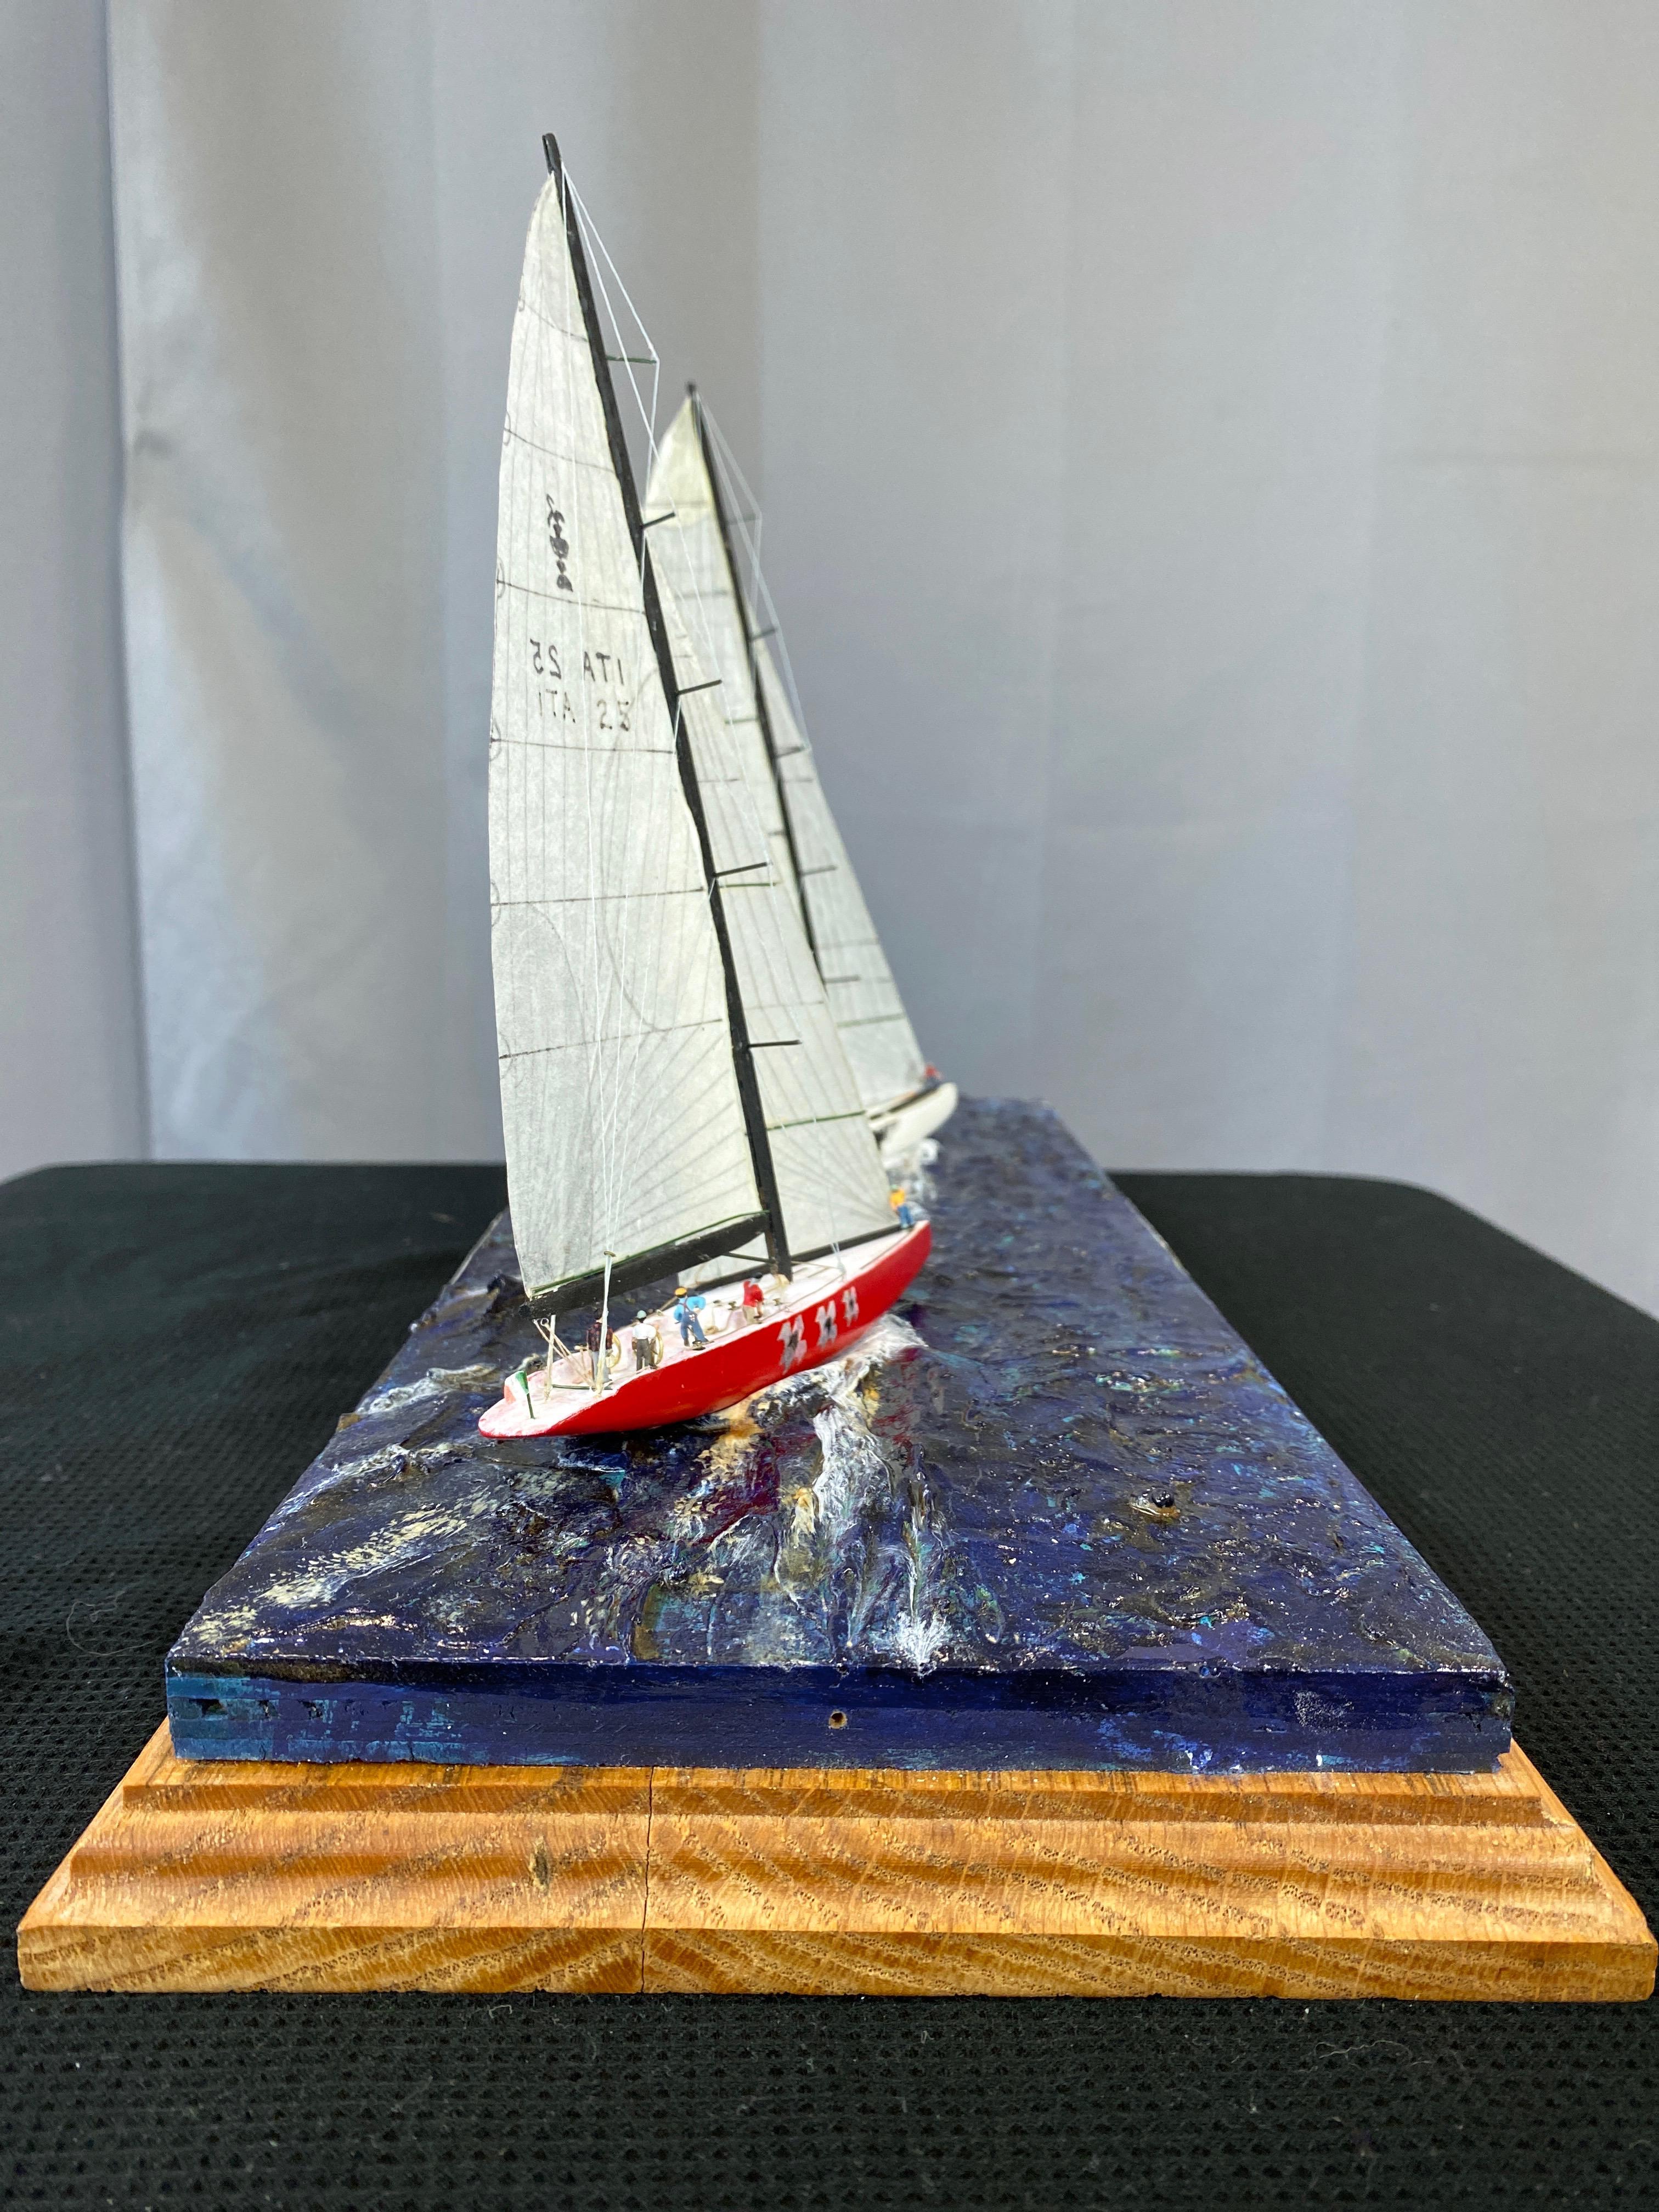 R. Royer 1992 28th America’s Cup Hand-Built Cased Diorama, 2009 12